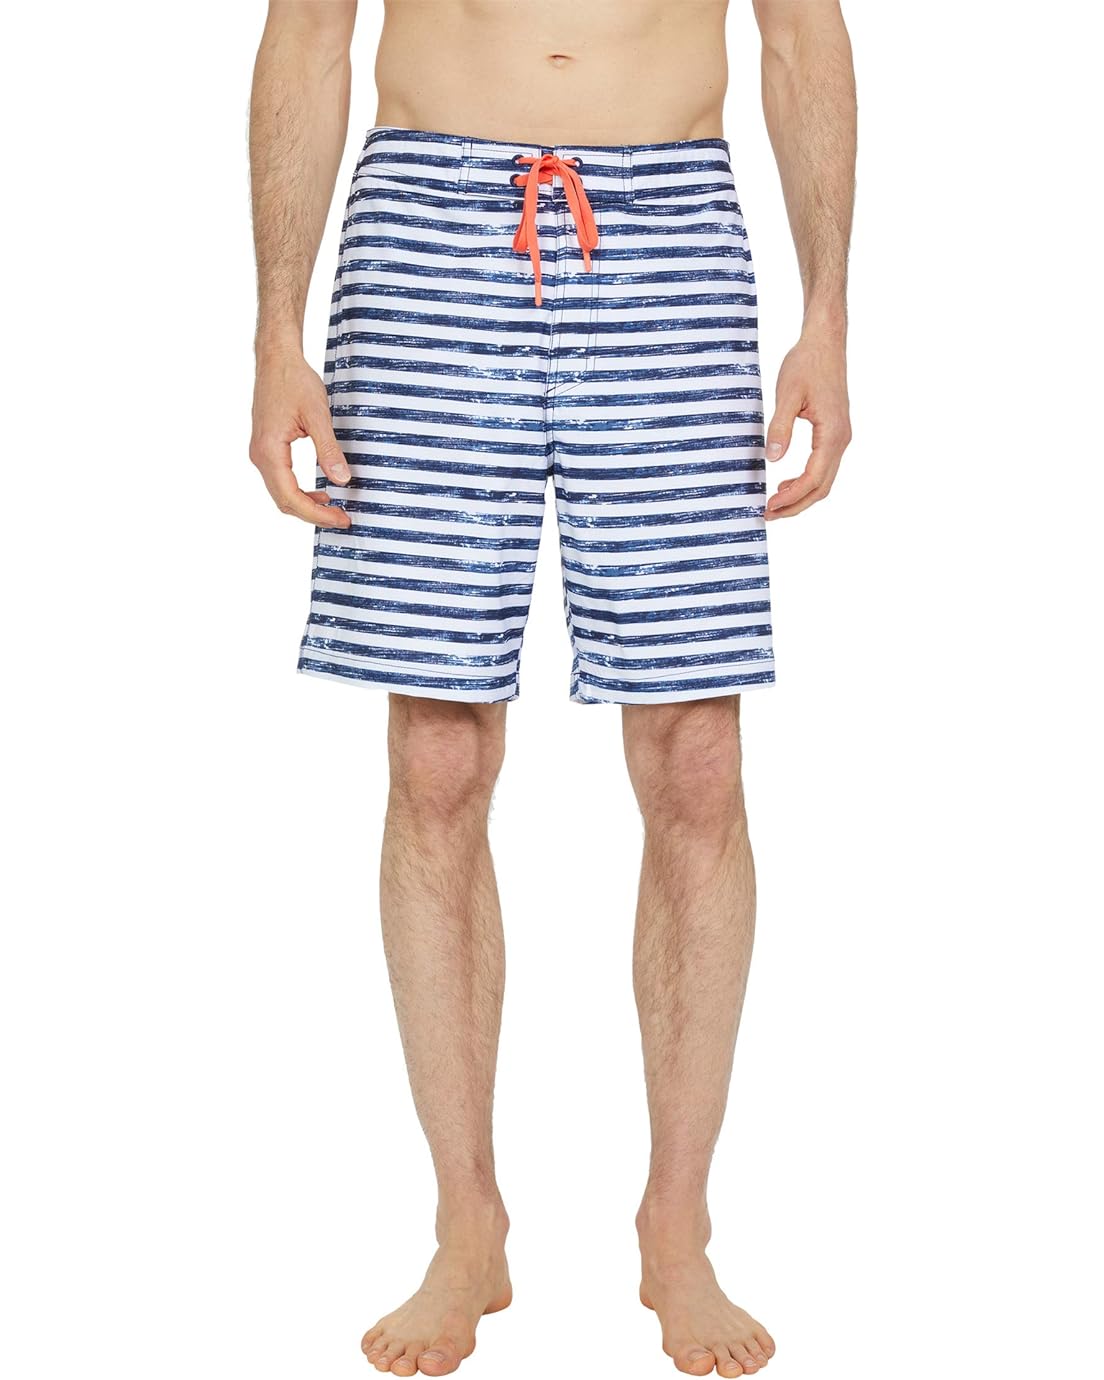 Southern Tide 8.5 Lisi Stripe Water Shorts